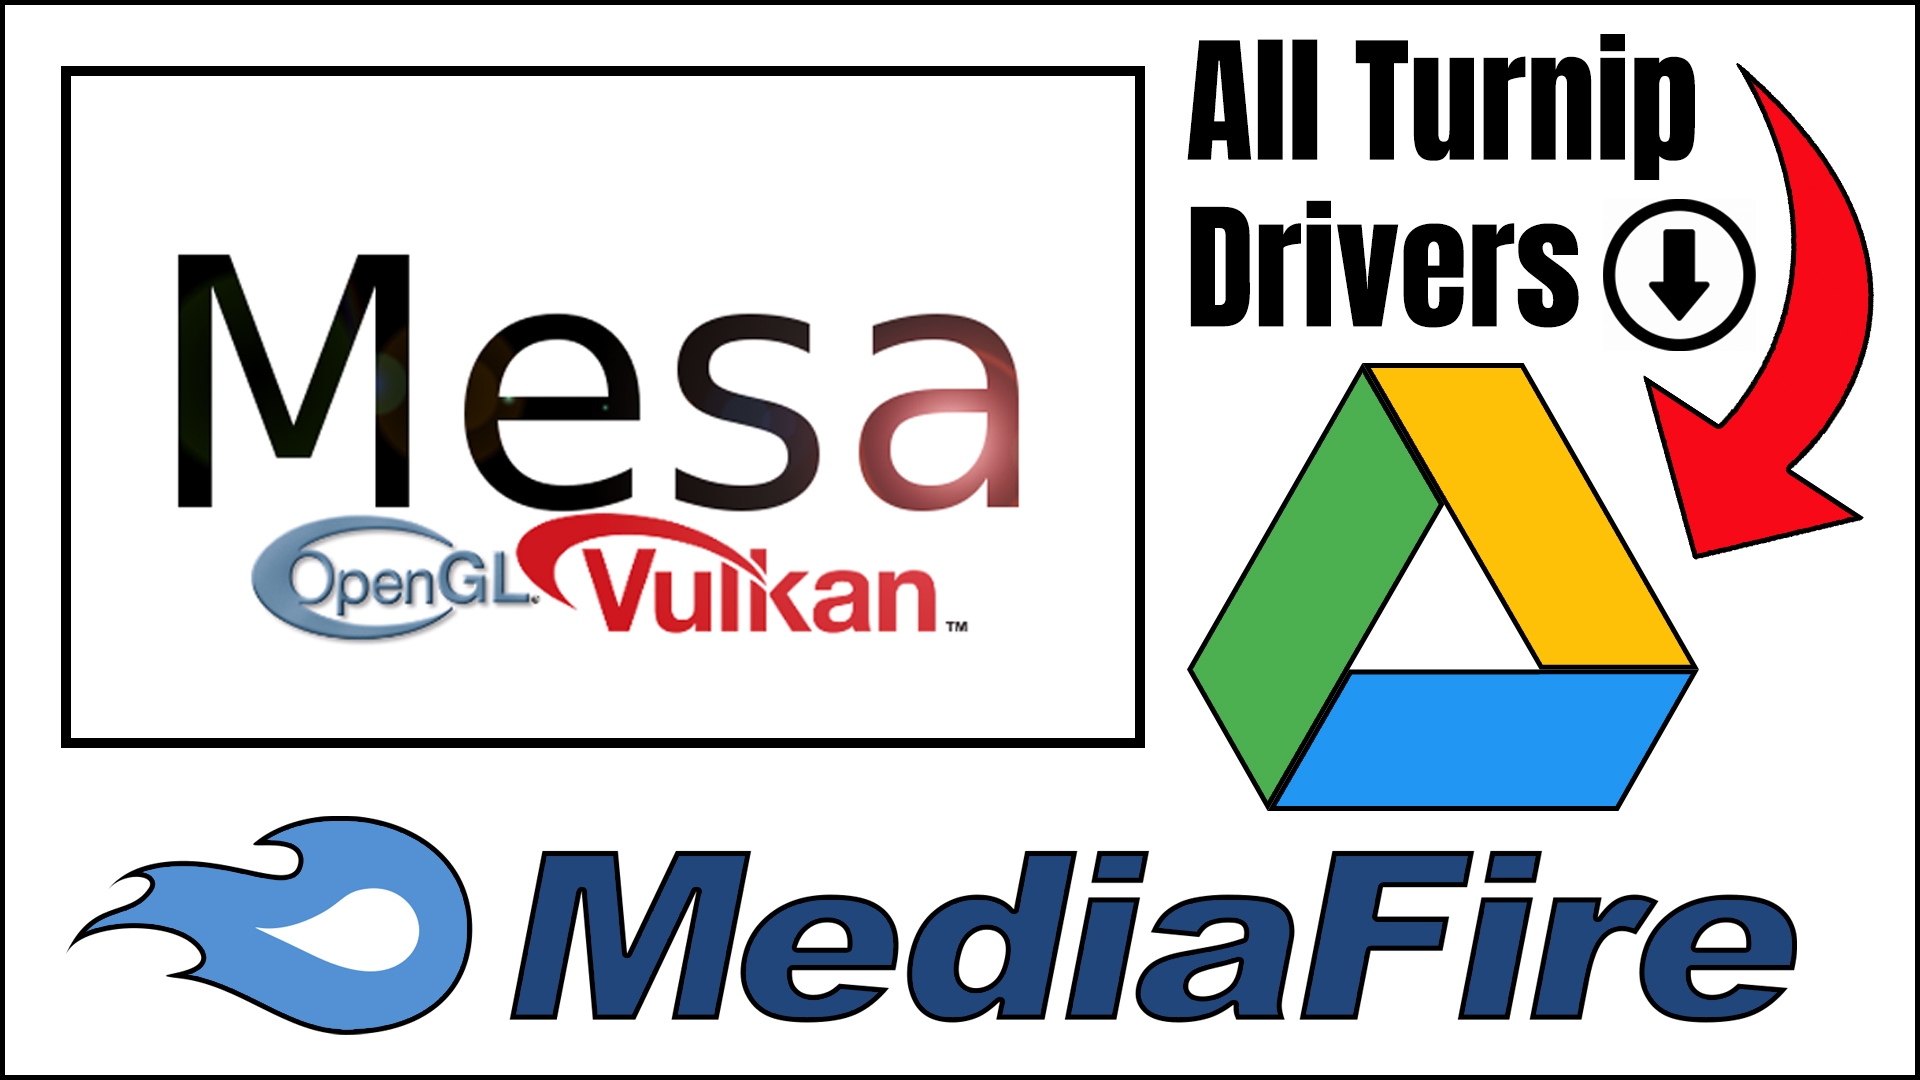 Download All Turnip Drivers From Google Drive and MediaFire